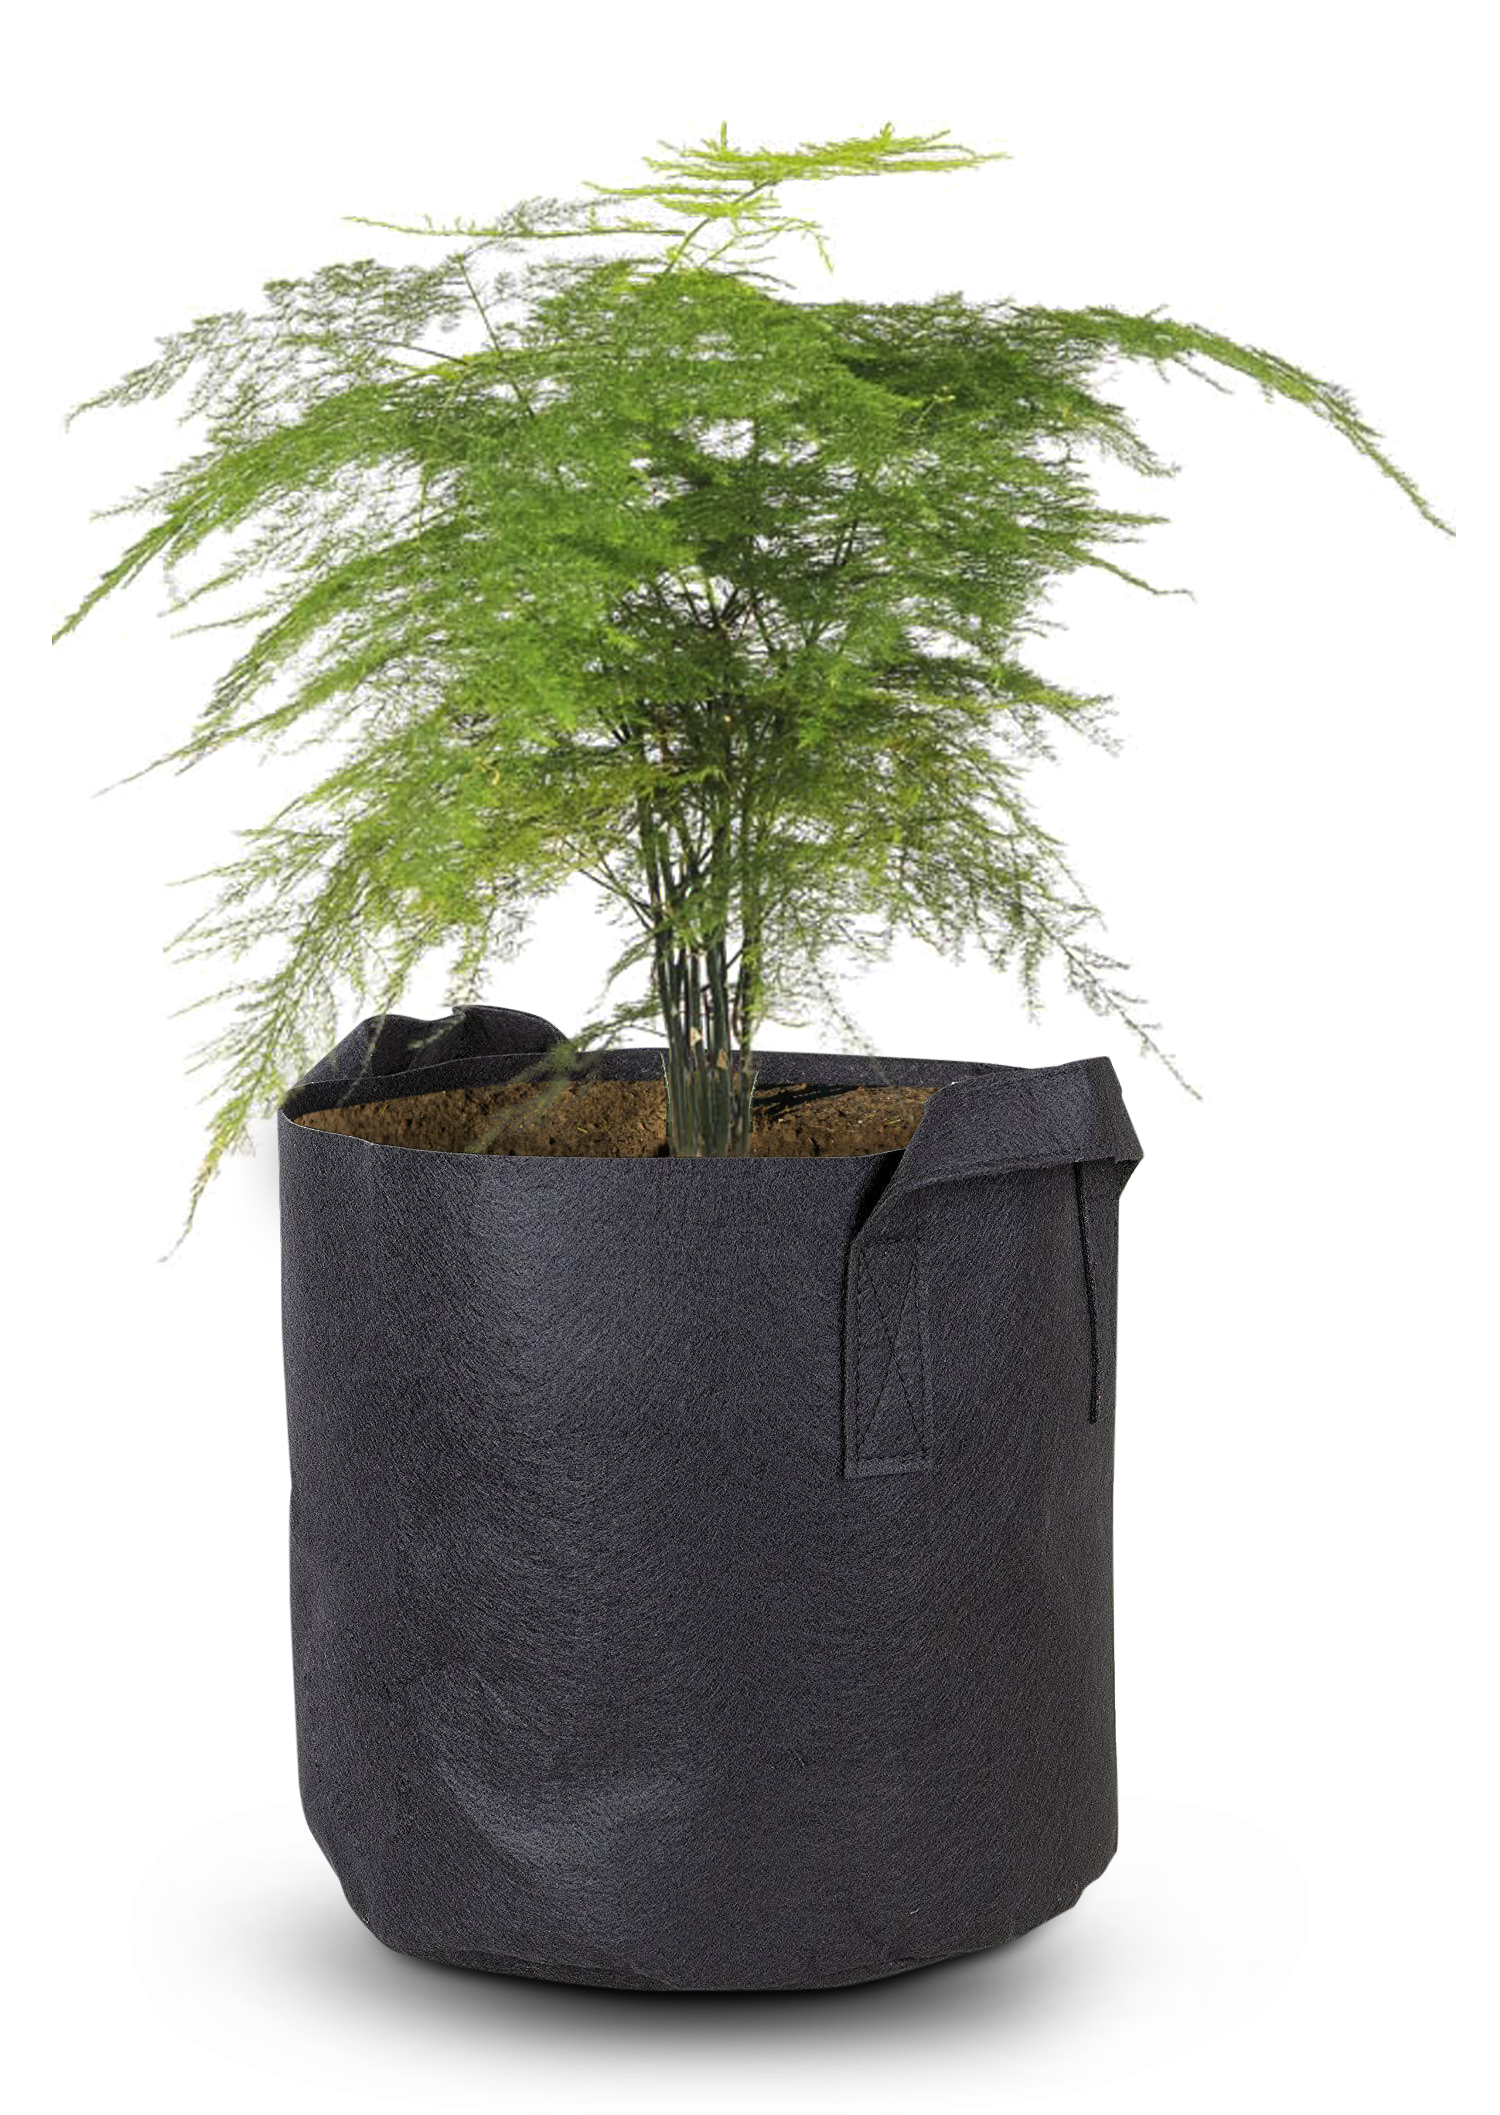 Garden Fabric Grow Bags 7 Gal. Buy 1 Get 1 Free!*** – Andy's Asparagus Acres